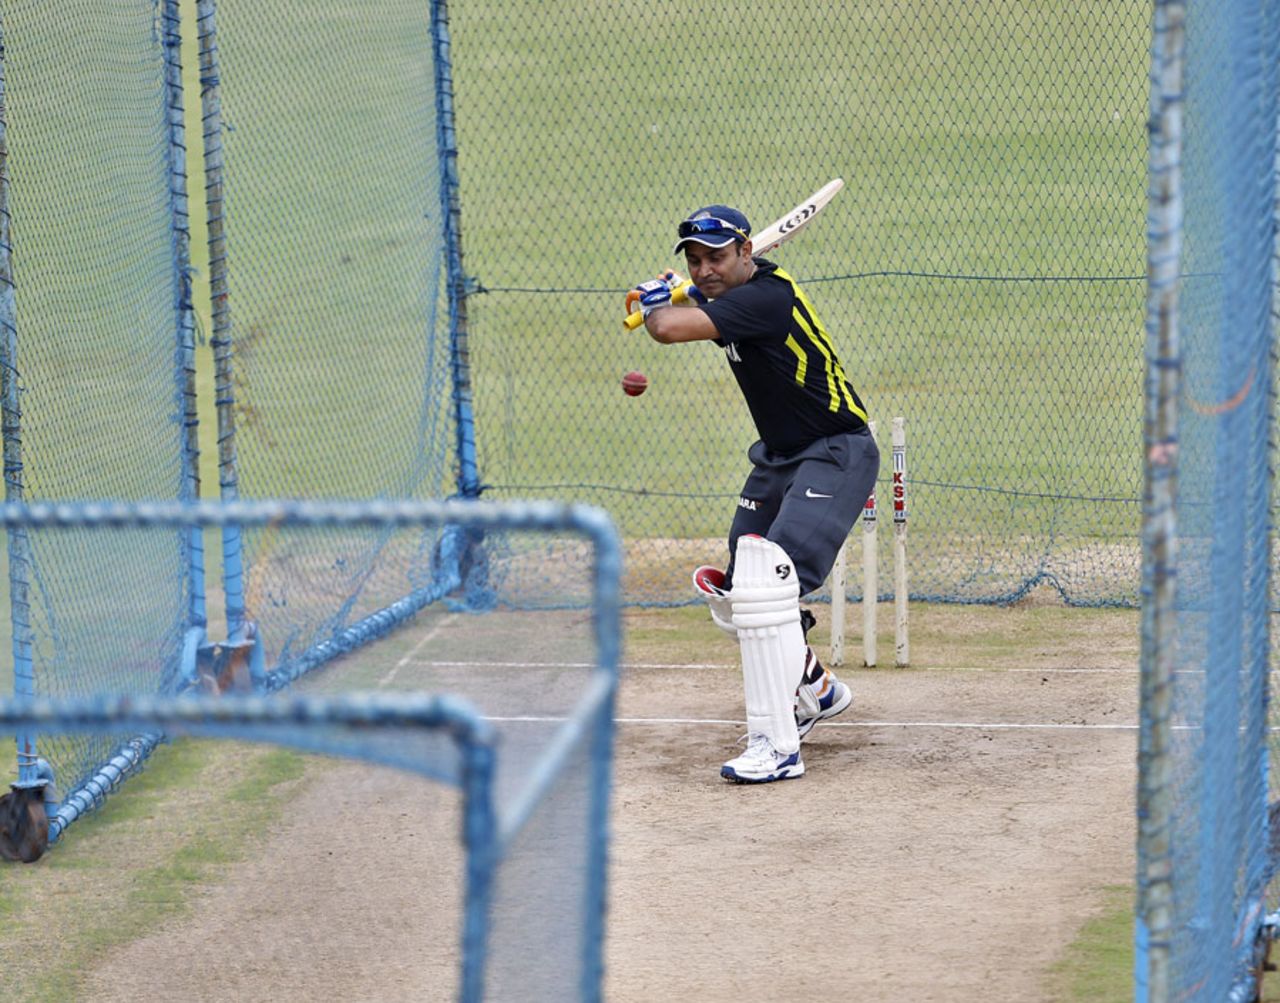 Virender Sehwag lets the ball go during a training session, Bangalore, August 30, 2012